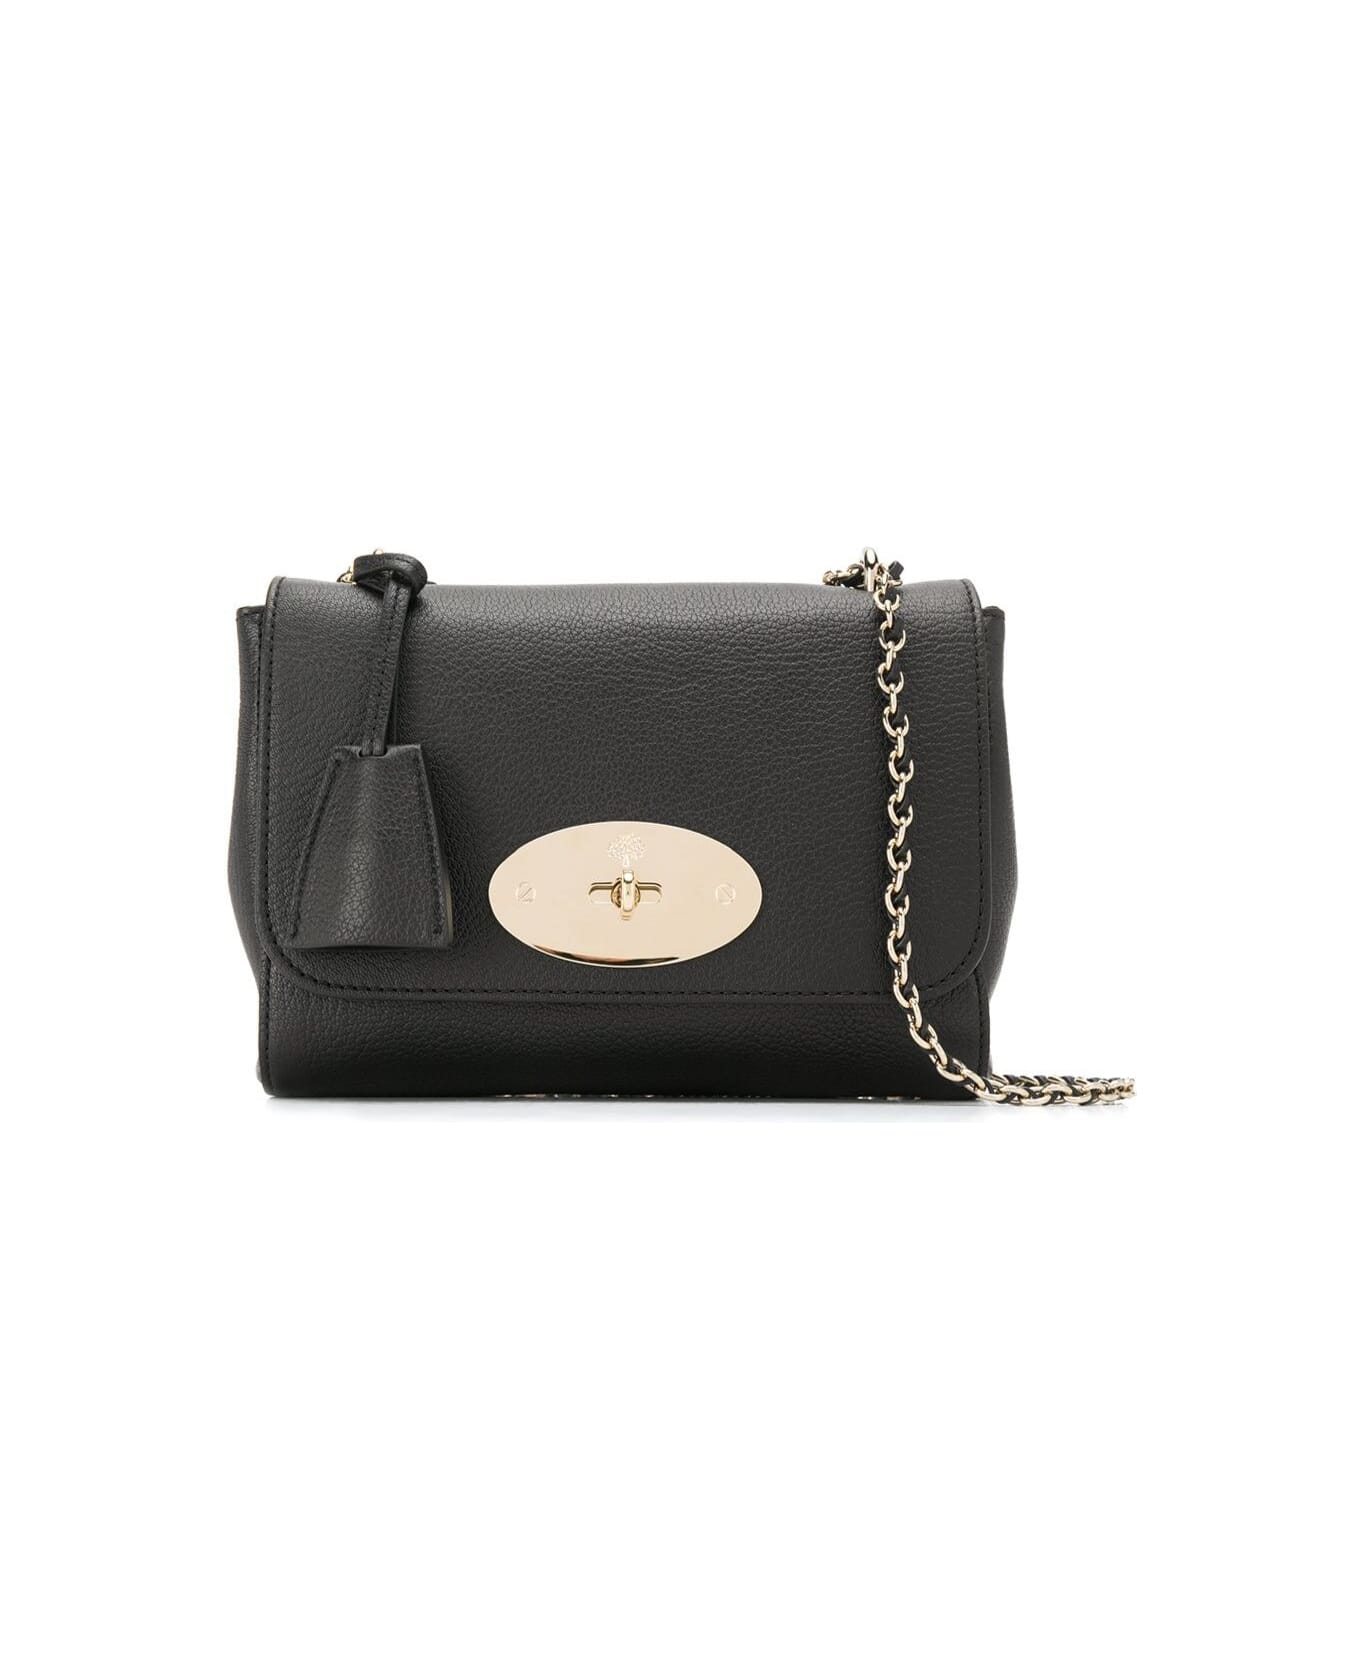 Mulberry 'lilly' Black Shoulder Bag With Twist Lock Closure In Leather Woman - Black